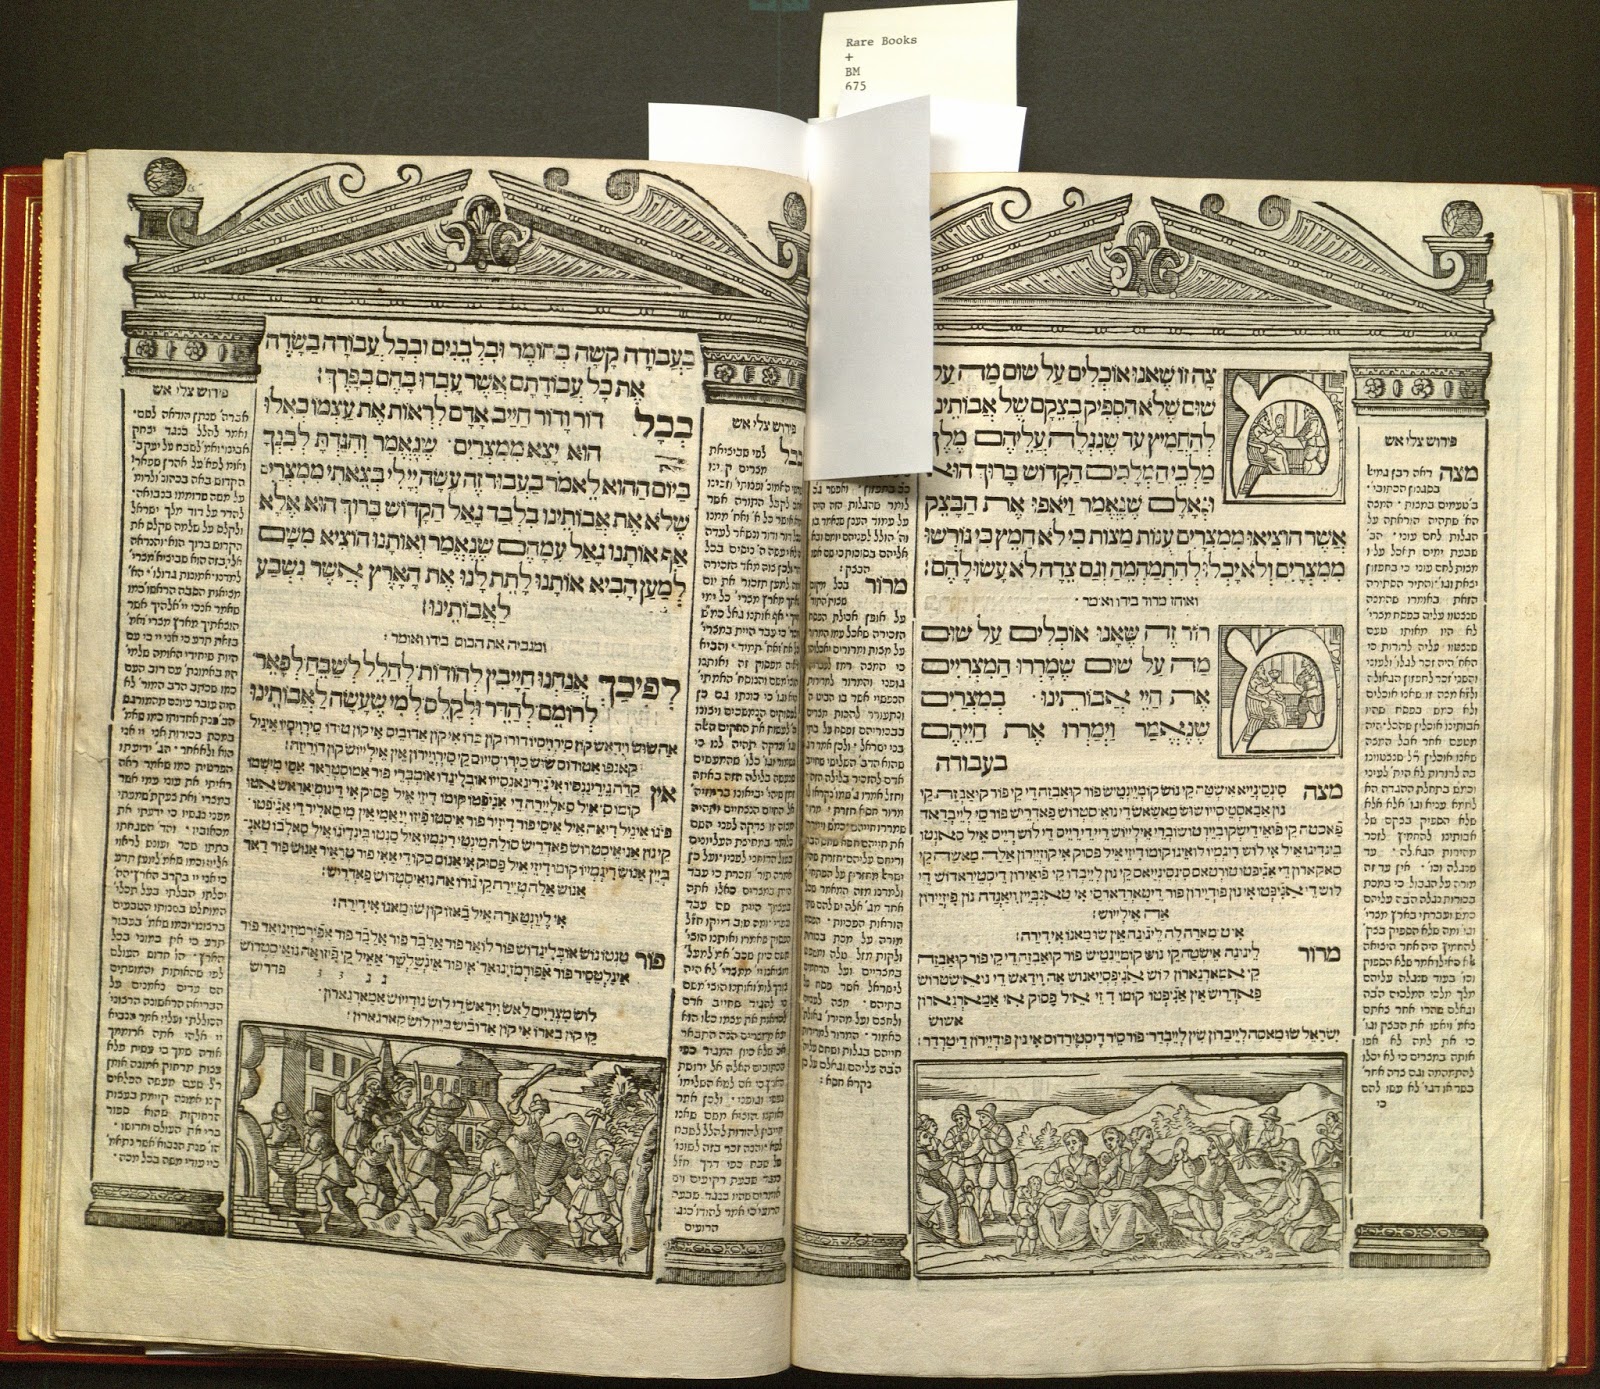 Haggadah open to show two pages of core Hebrew text flanked by commentary in Ladino. Woodcut illustration frames the text on each page as Classical-style buildings, with pediment and columns; Additional woodblock illustrations include historiated initials and scenes from the Haggadah.